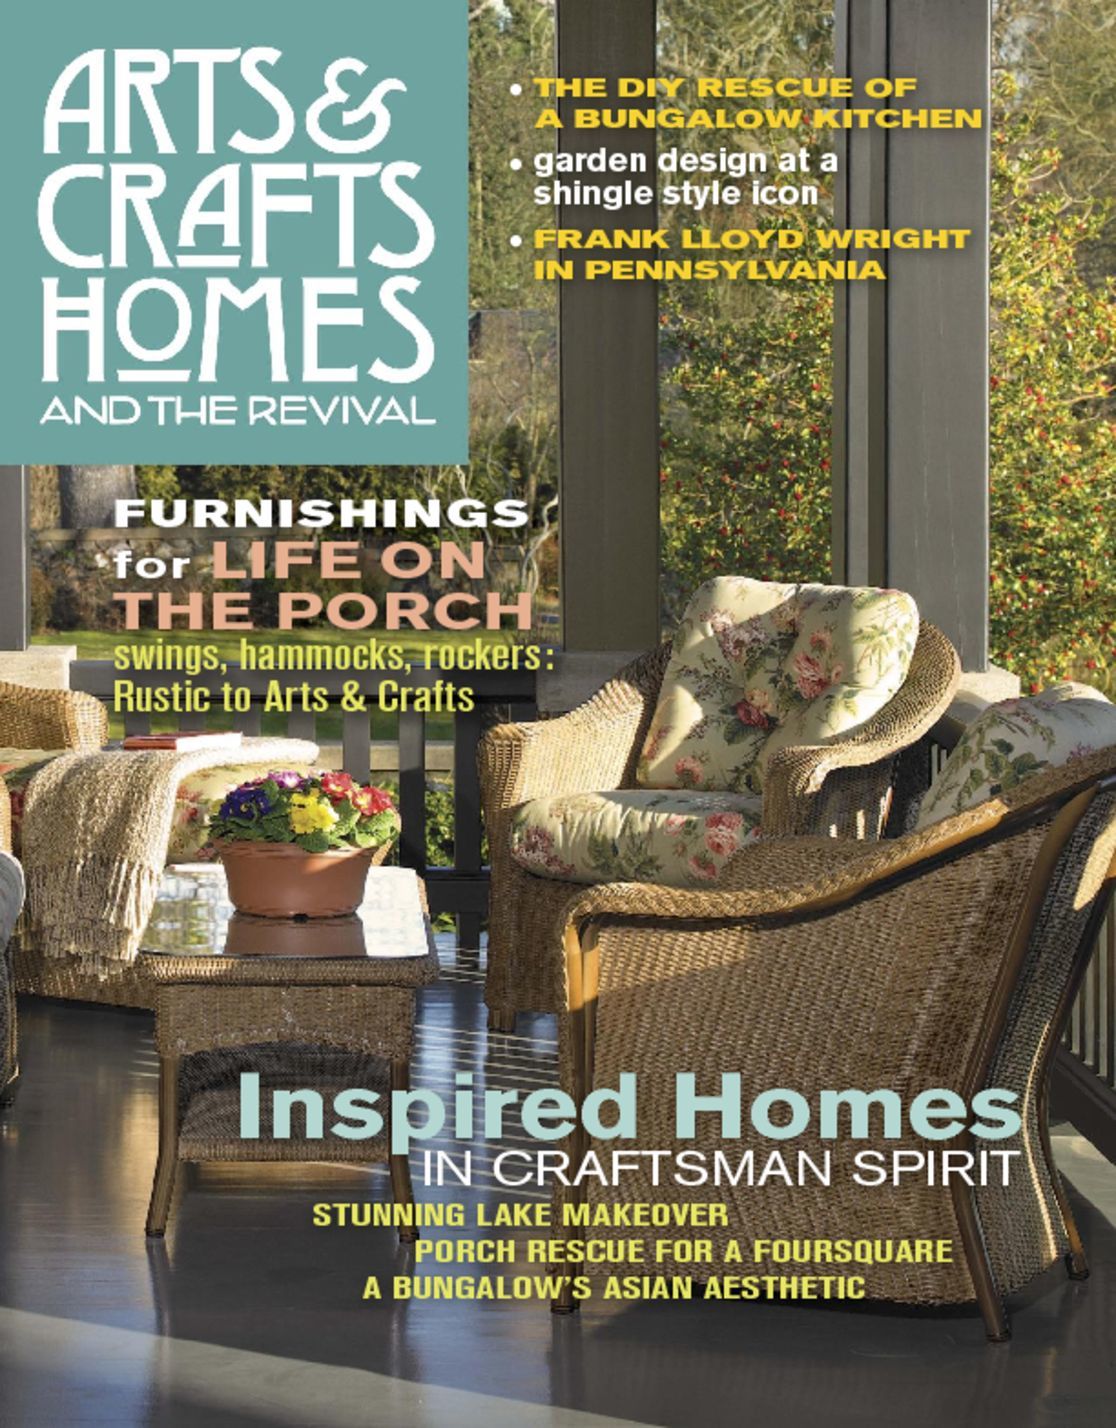 8483 Arts Crafts Homes Cover 2017 June 1 Issue 